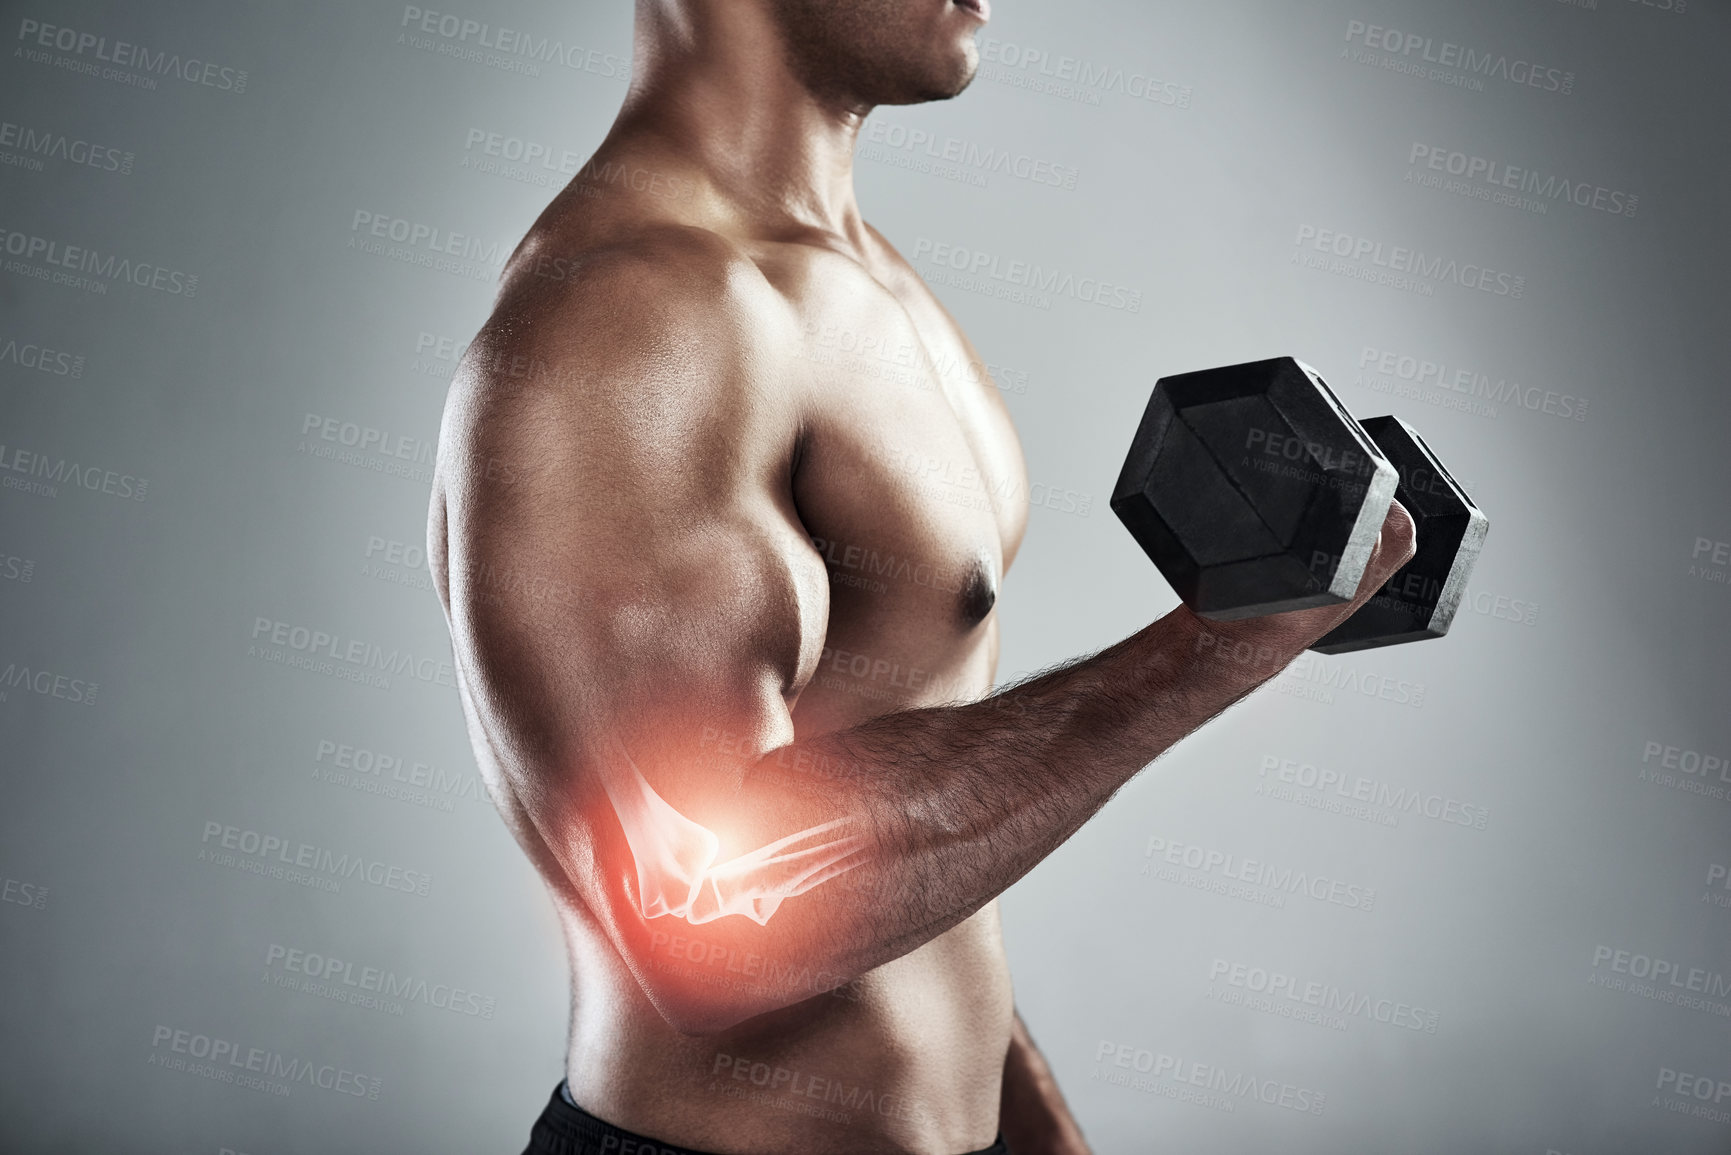 Buy stock photo Shot of a sporty young man working out with a dumbbell against a grey background